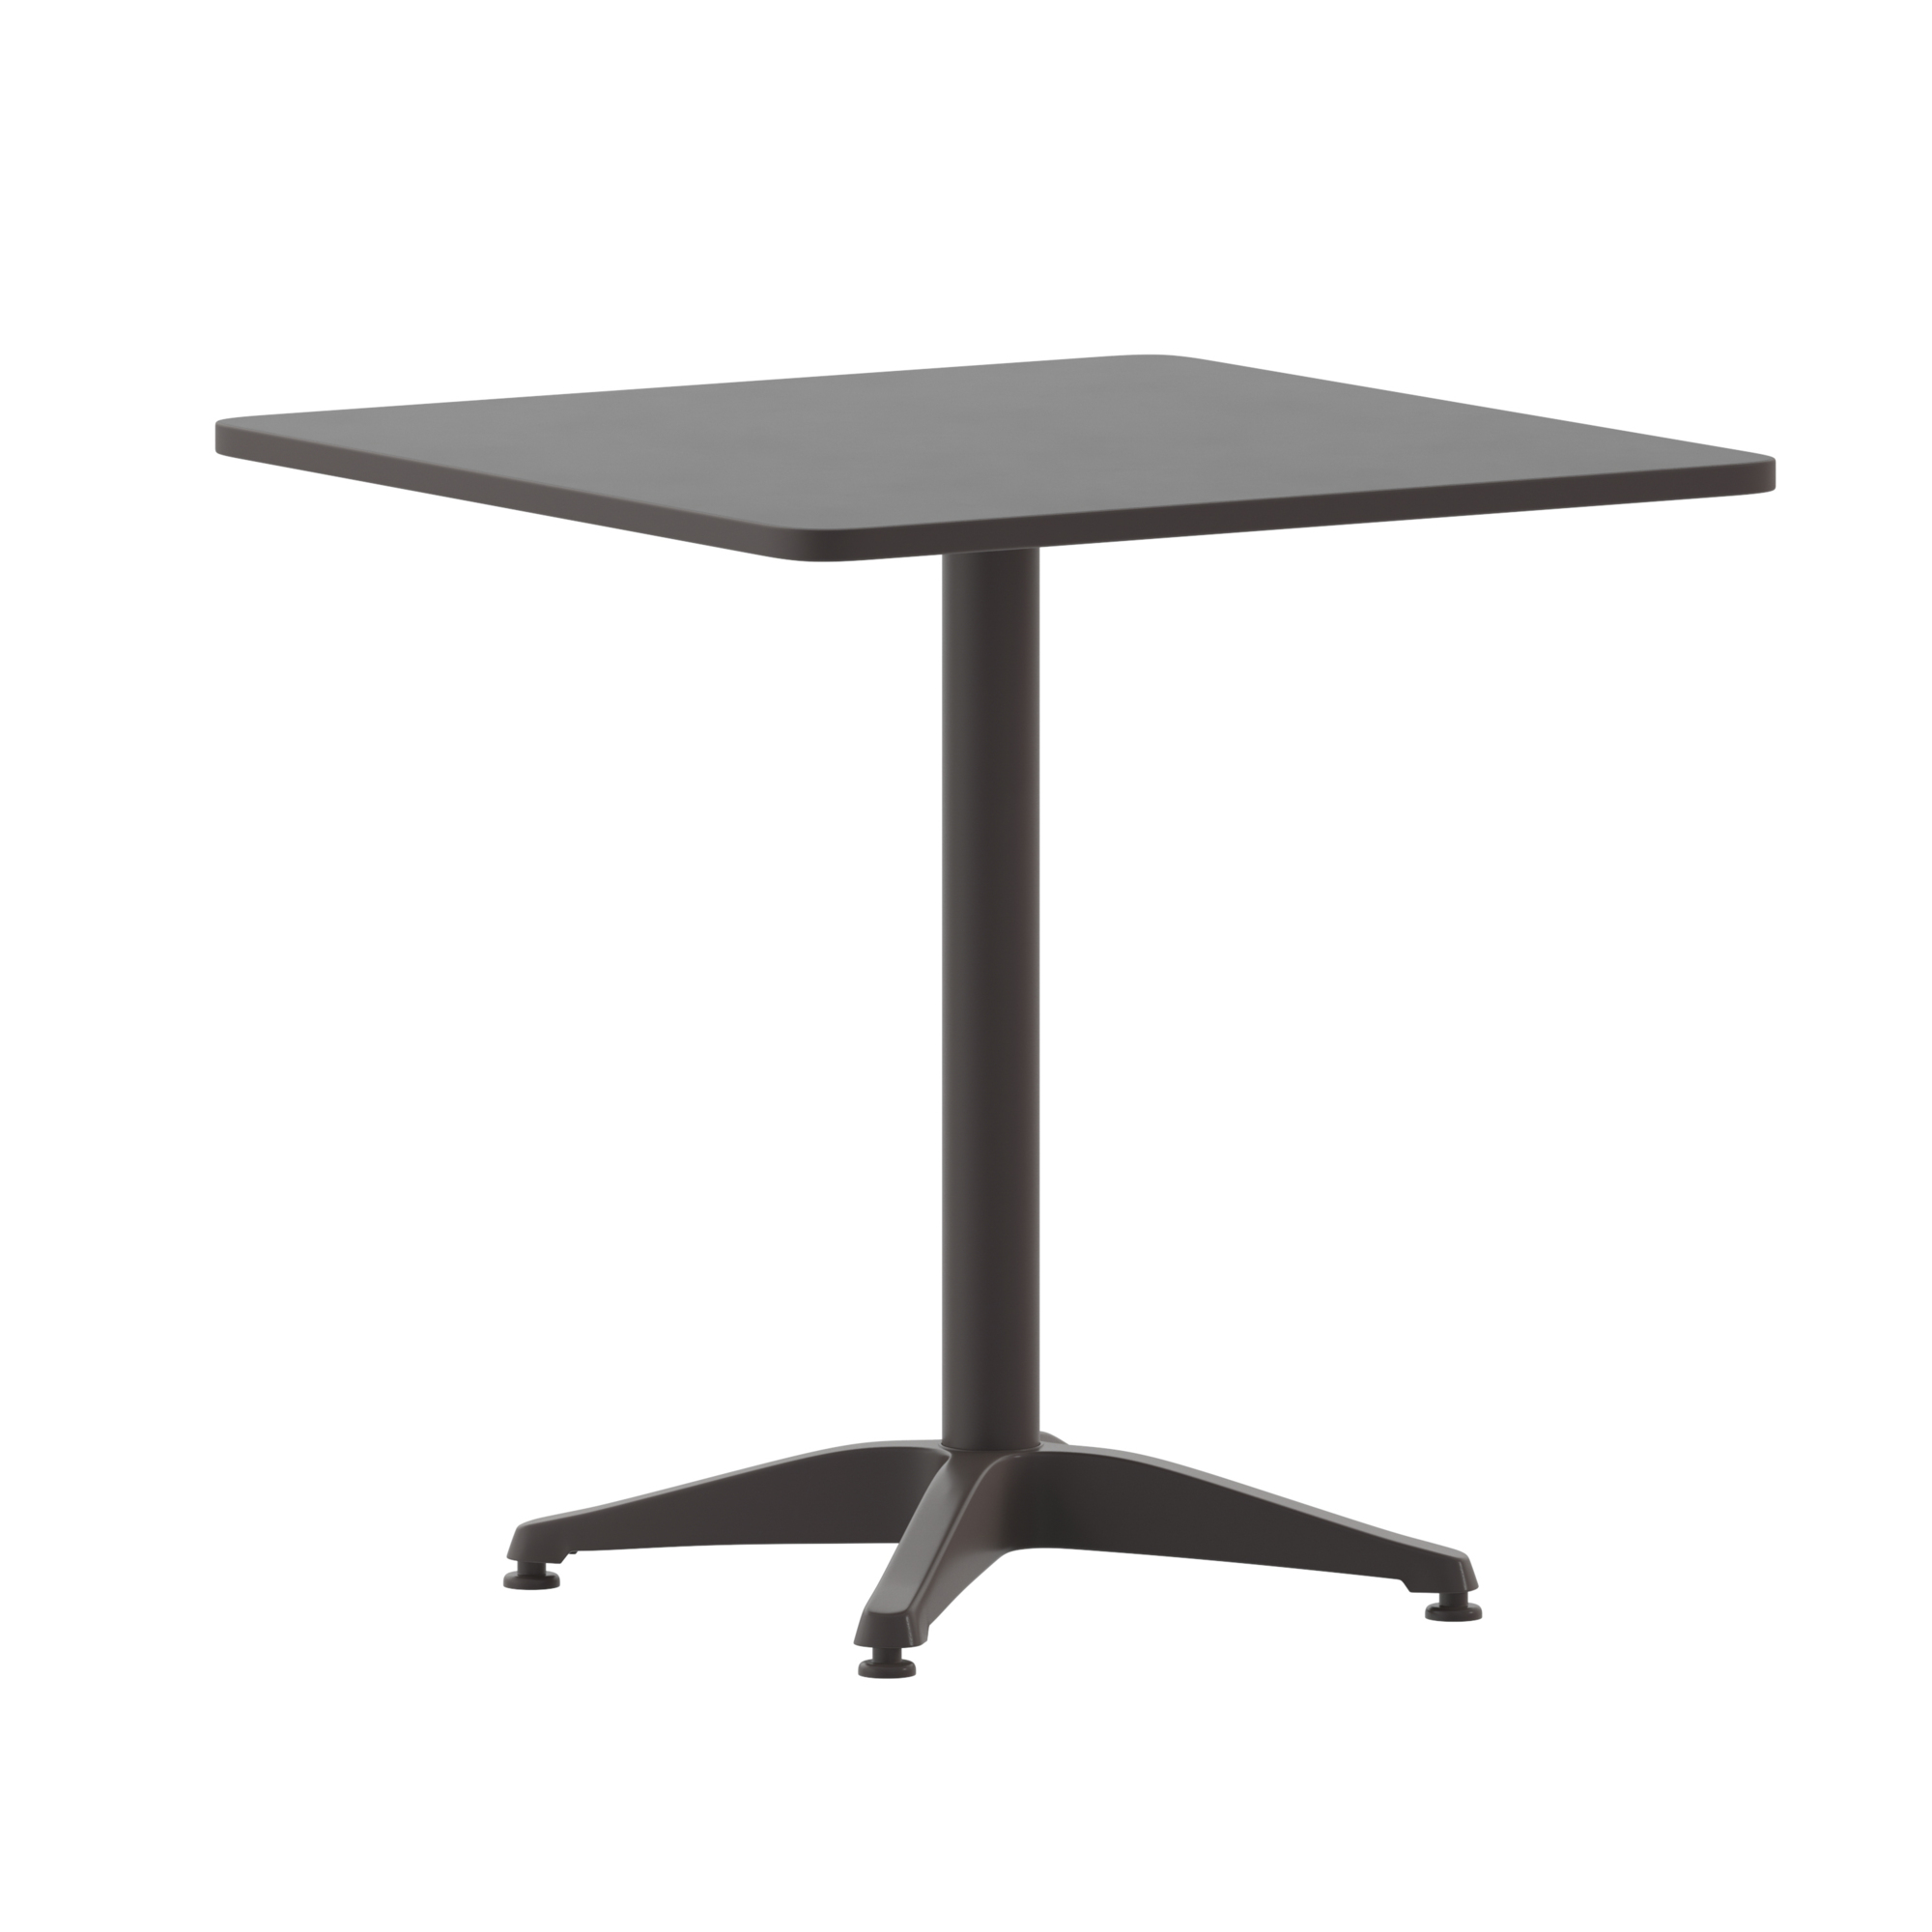 Flash Furniture, 27.5SQ Bronze Metal Indoor-Outdoor Table w/ Base, Table Shape Square, Primary Color Brown, Height 27.5 in, Model TLH0532BZ